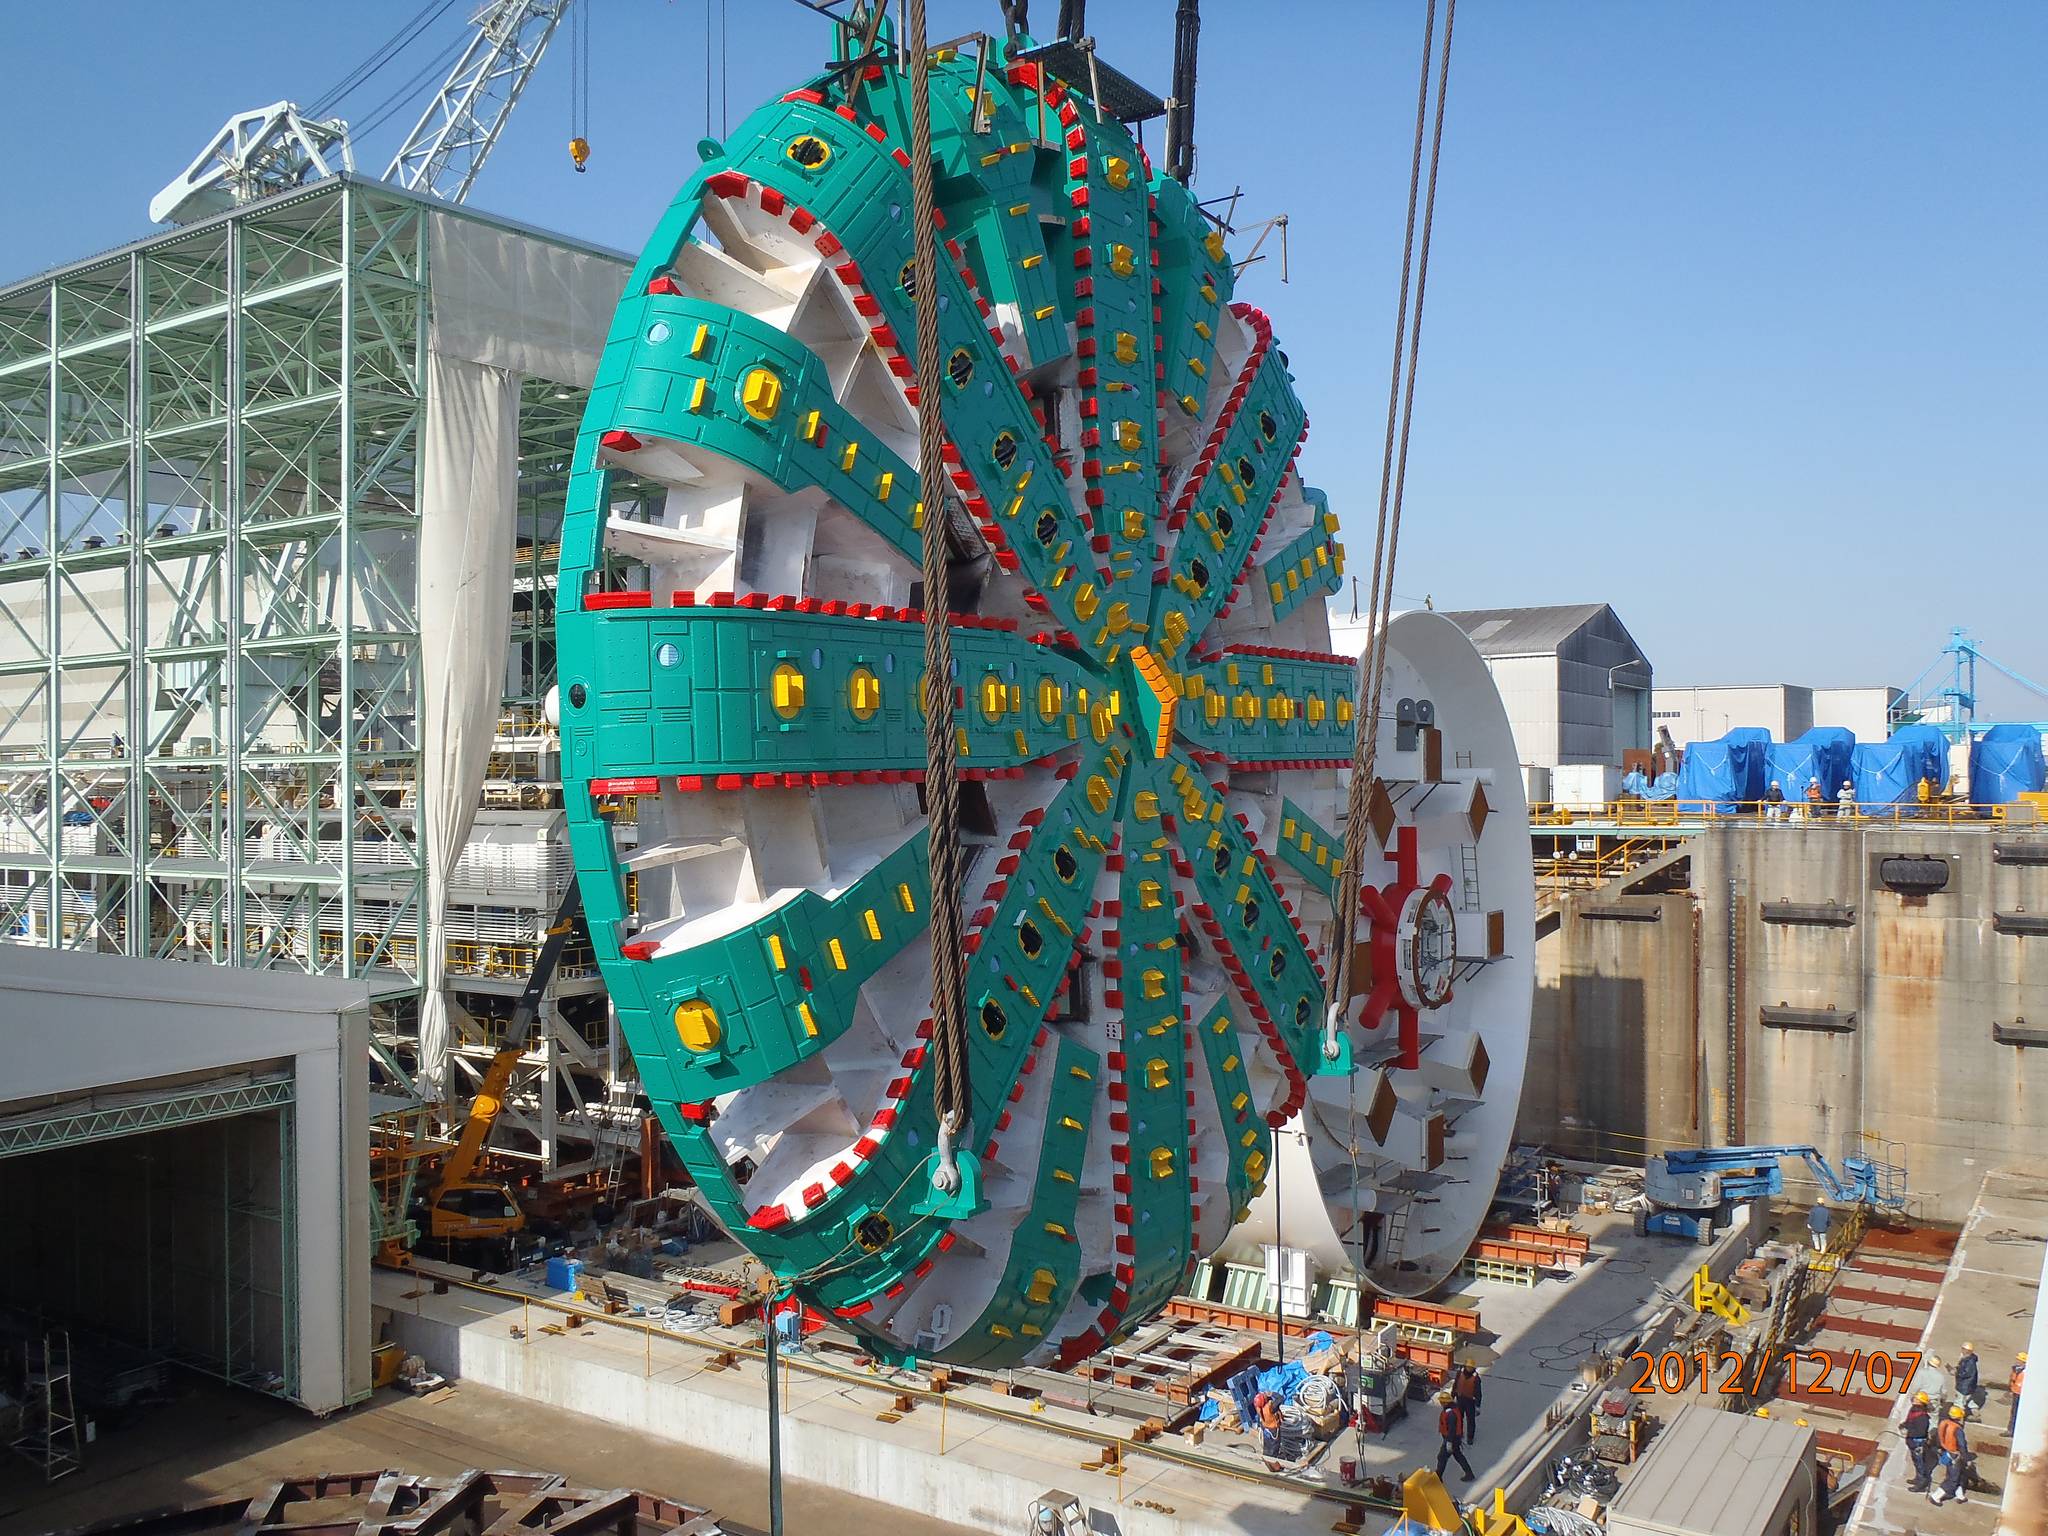 Cutterhead of the worlds largest-diameter tunnel boring machine, which began to dig the State Route 99 tunnel beneath downtown Seattle in summer 2013.